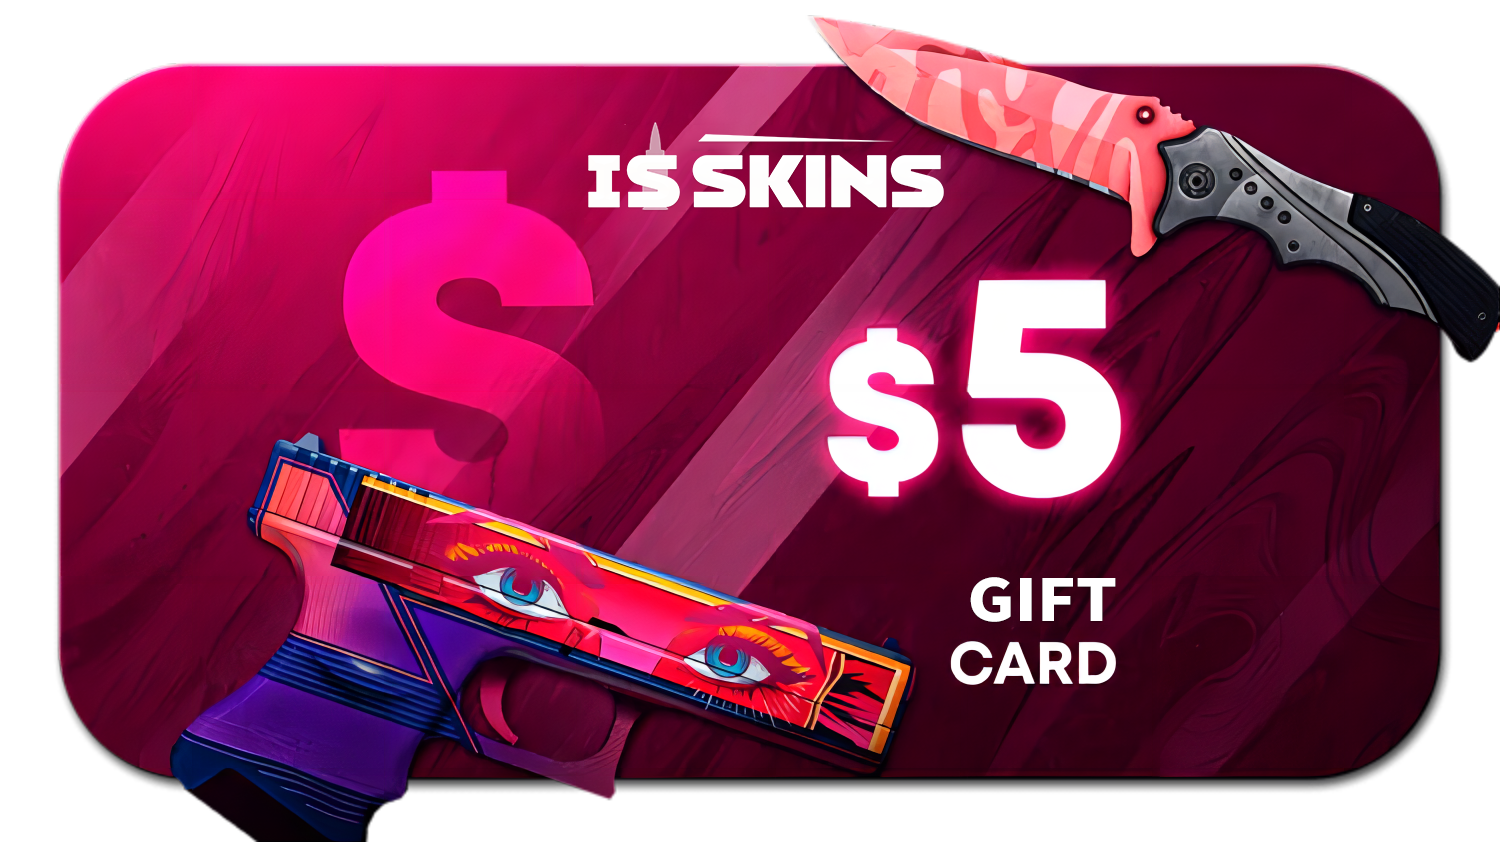 ISSKINS $5 Gift Card 5.29$